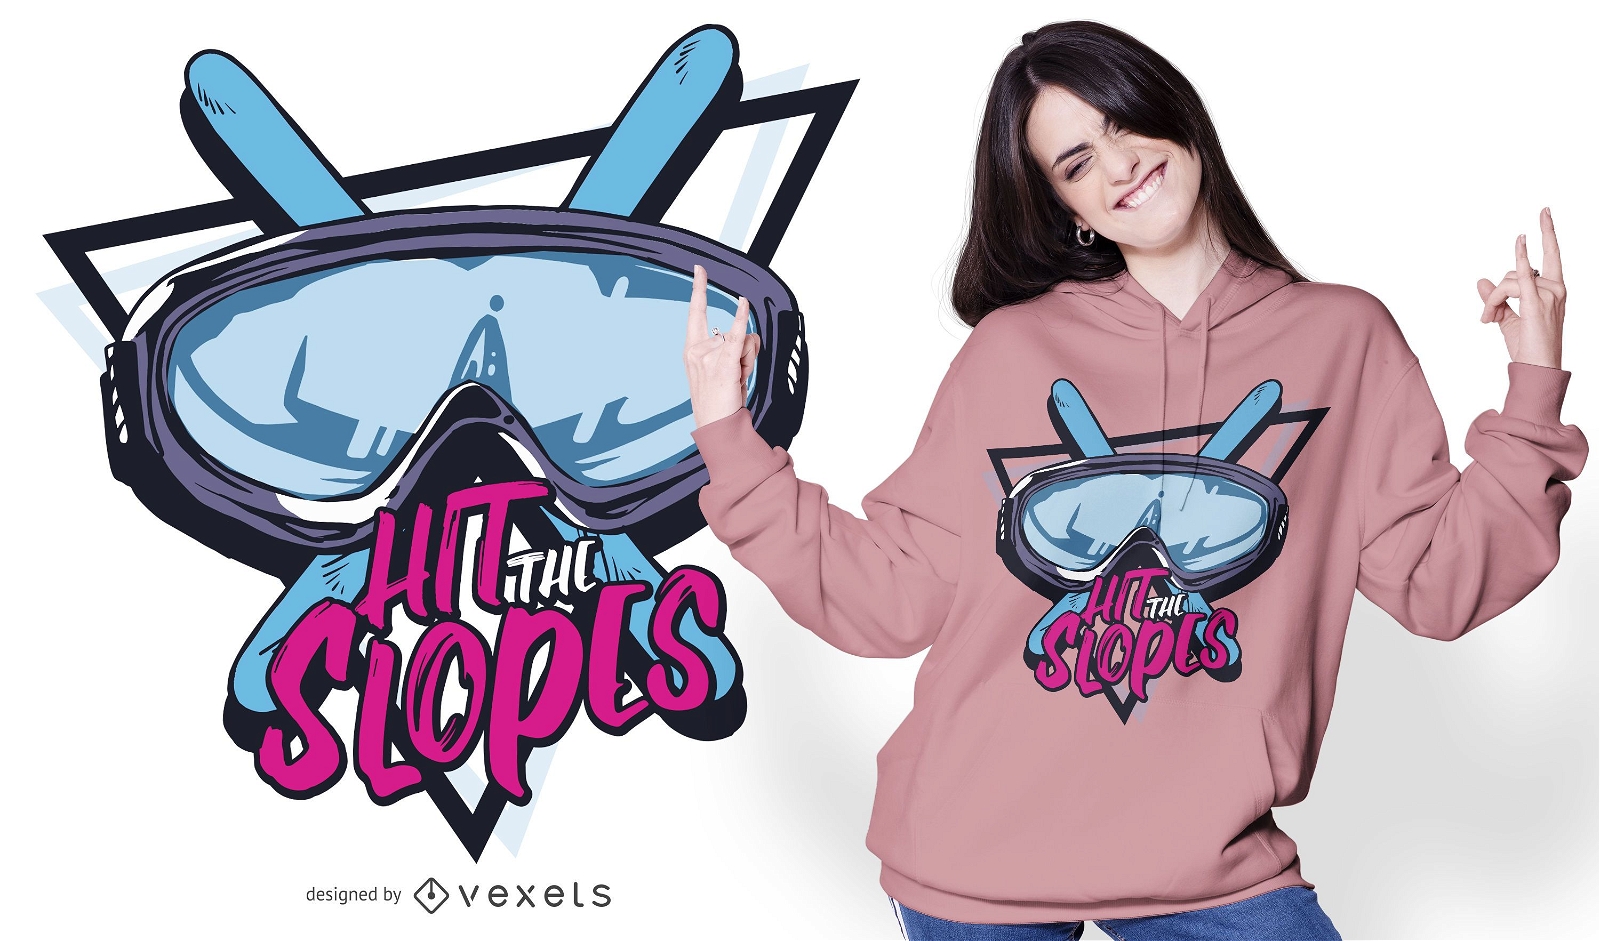 Hit the slopes quote t-shirt design